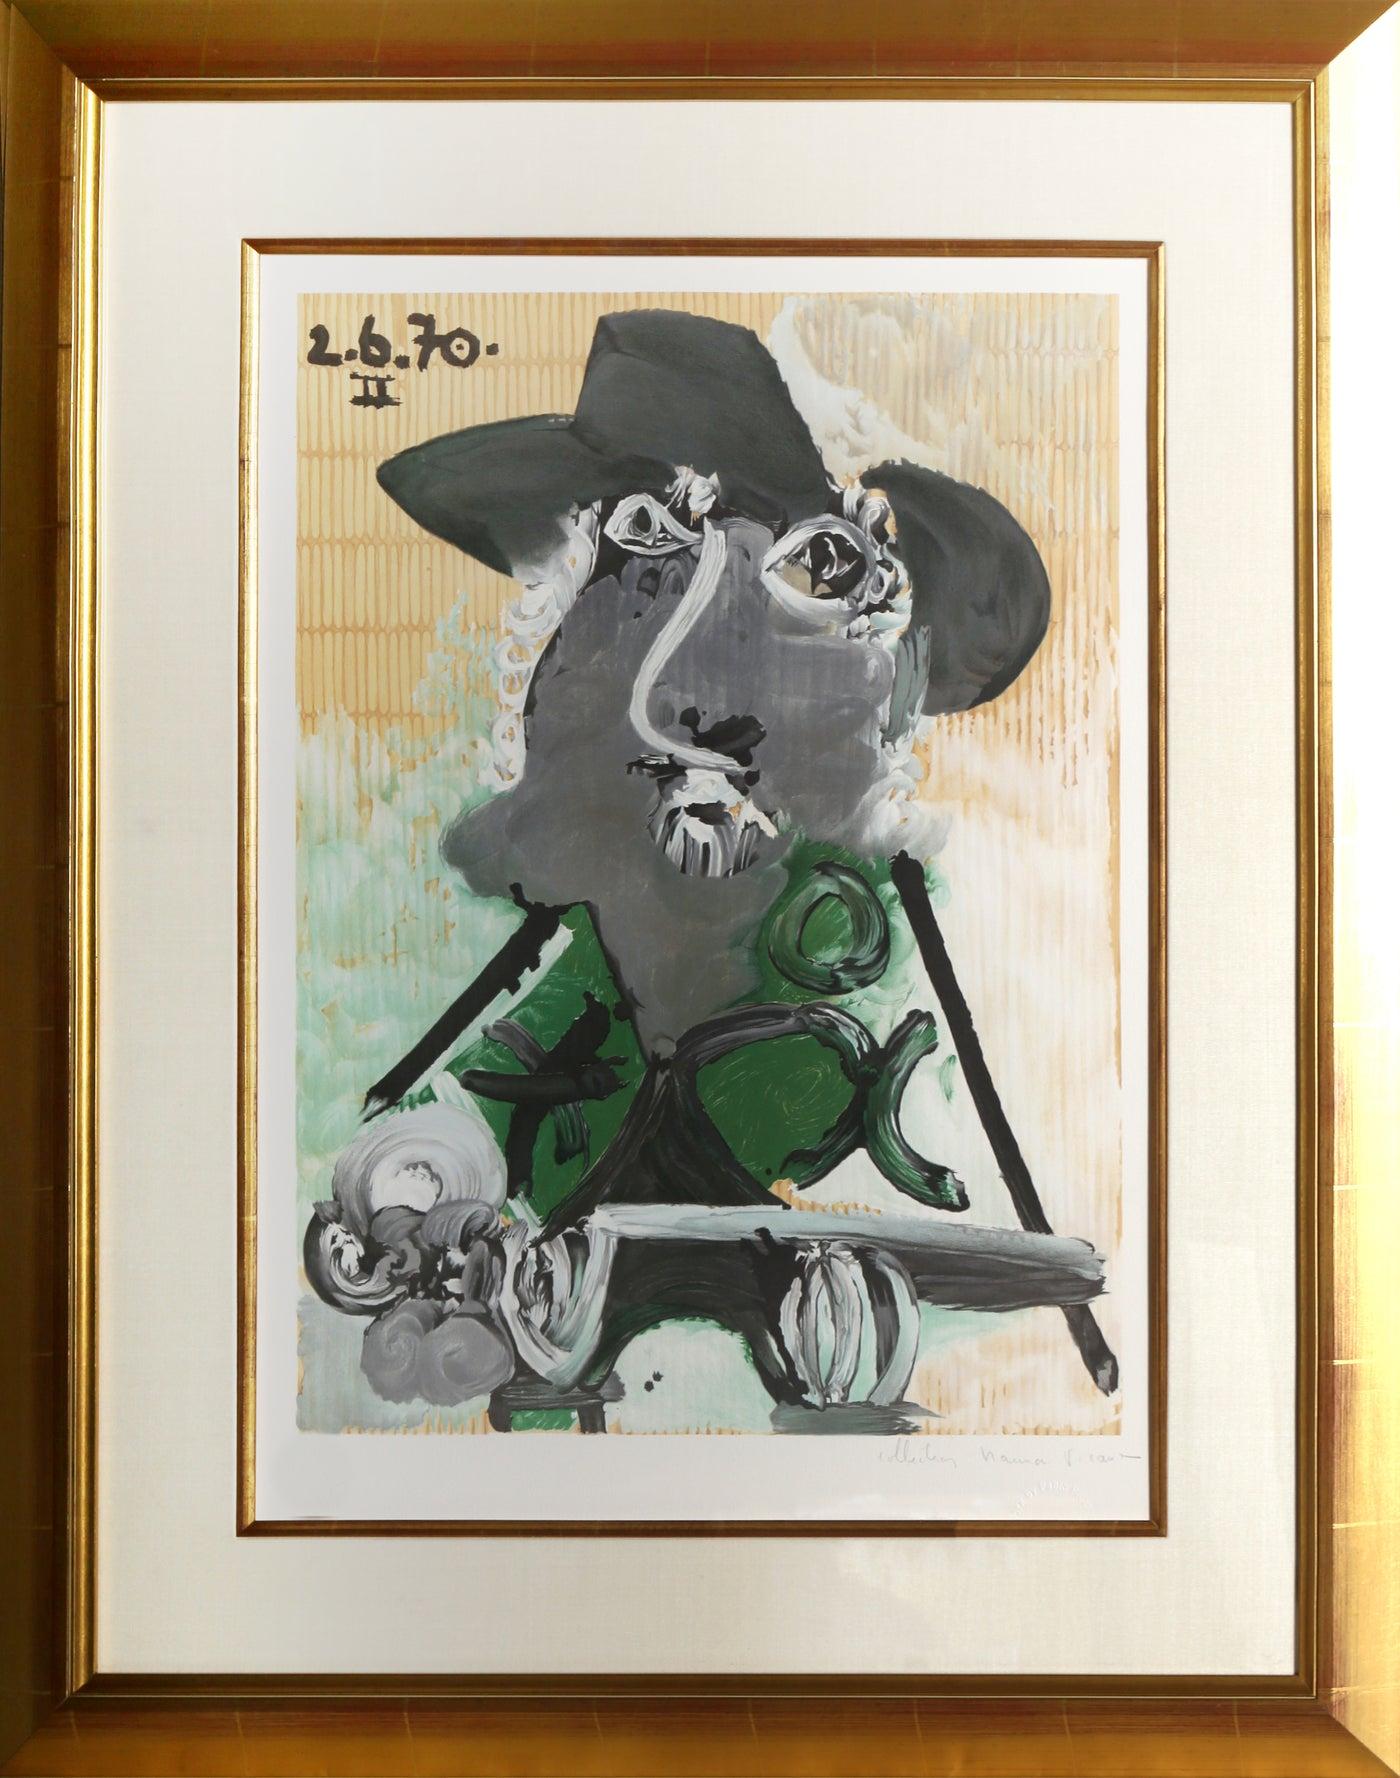 A lithograph from the Marina Picasso Estate Collection after the Pablo Picasso painting "Portrait d'Homme au Chapeau".  The original painting was completed in 1970. In the 1970's after Picasso's death, Marina Picasso, his granddaughter, authorized